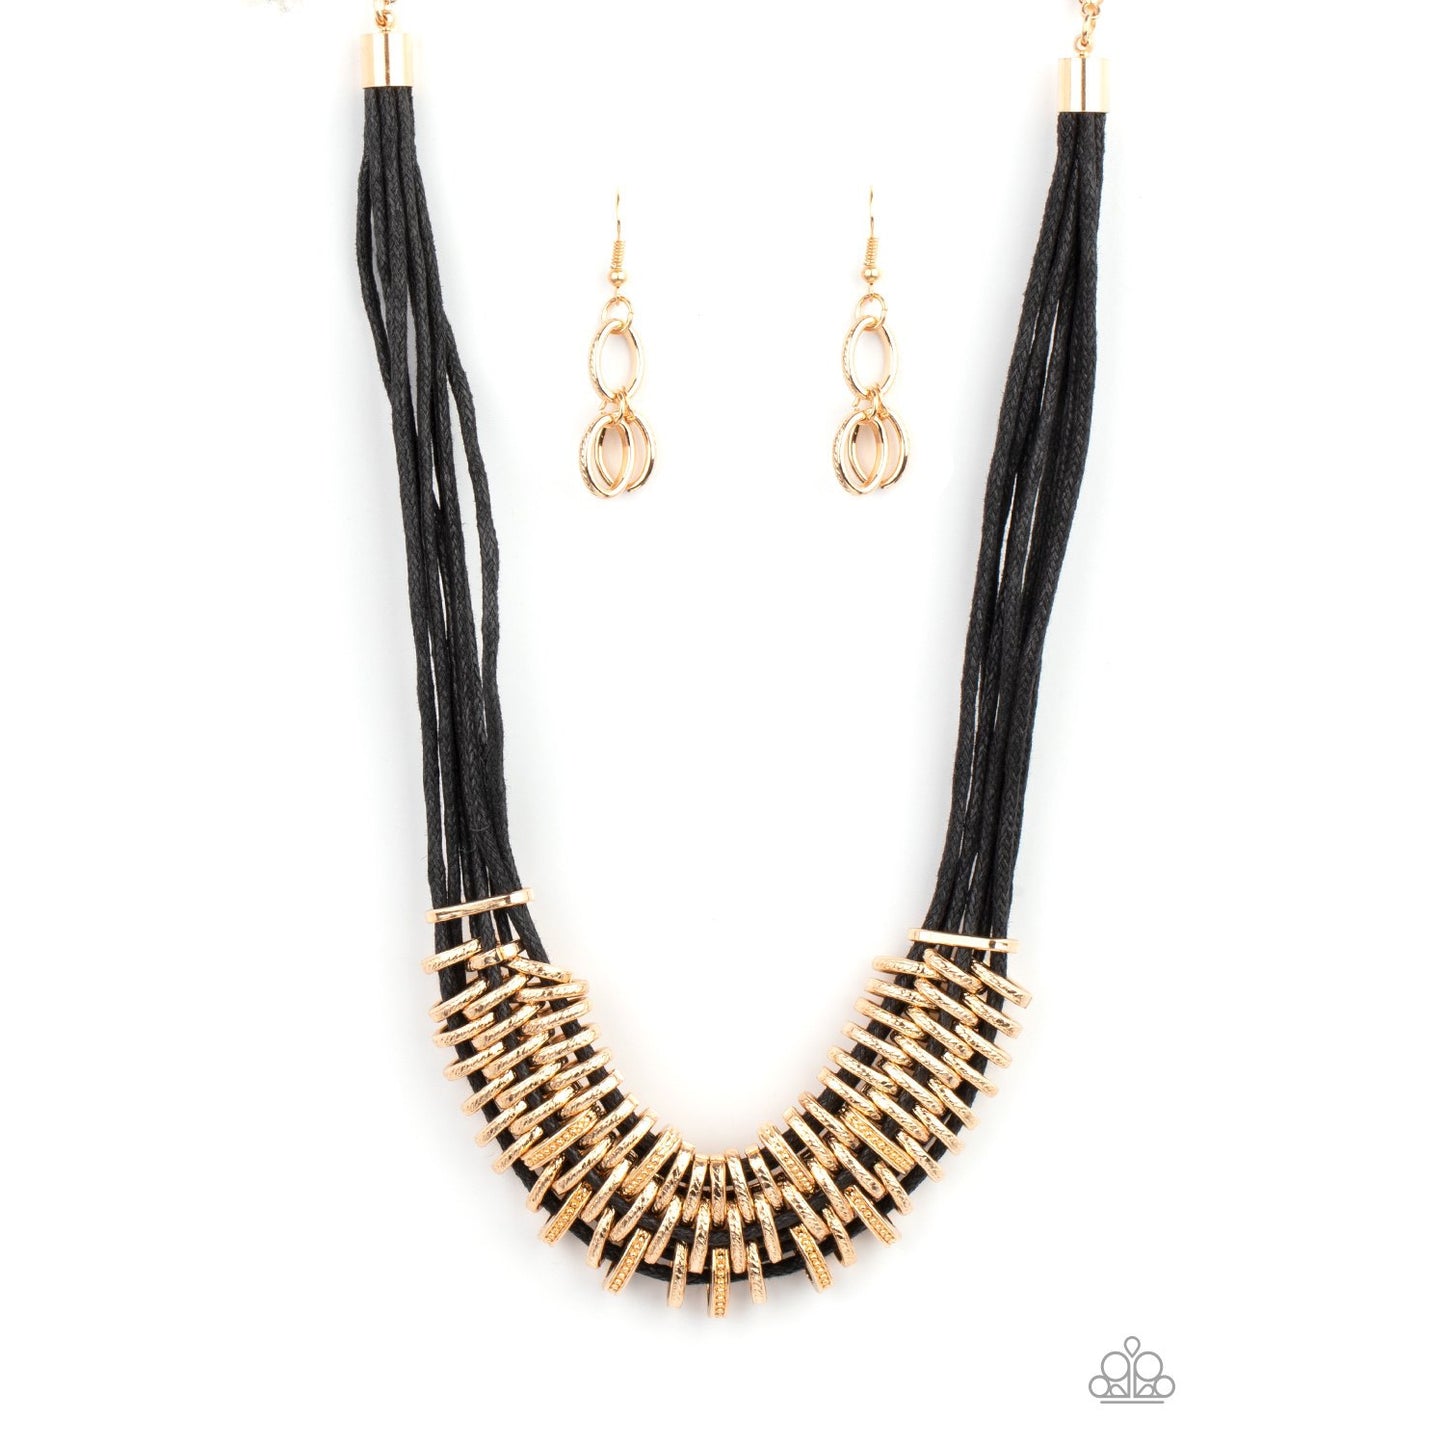 Lock, Stock, and SPARKLE - Gold Necklace - Paparazzi Accessories - GlaMarous Titi Jewels